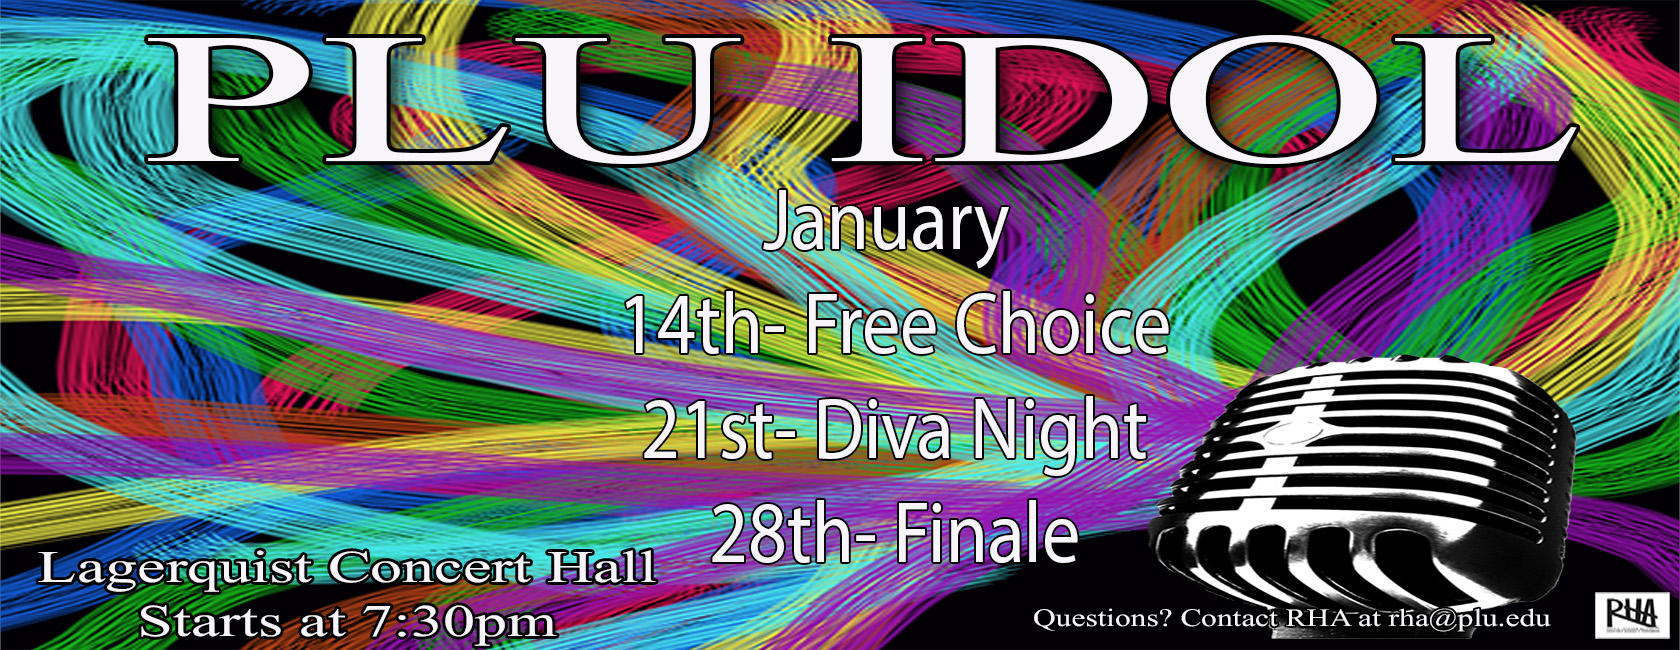 PLU Idol, January 14th-Free Choice 21st-Diva Night 28th-Finale banner - Lagerquist Concert Hall, Starts at 7:30pm